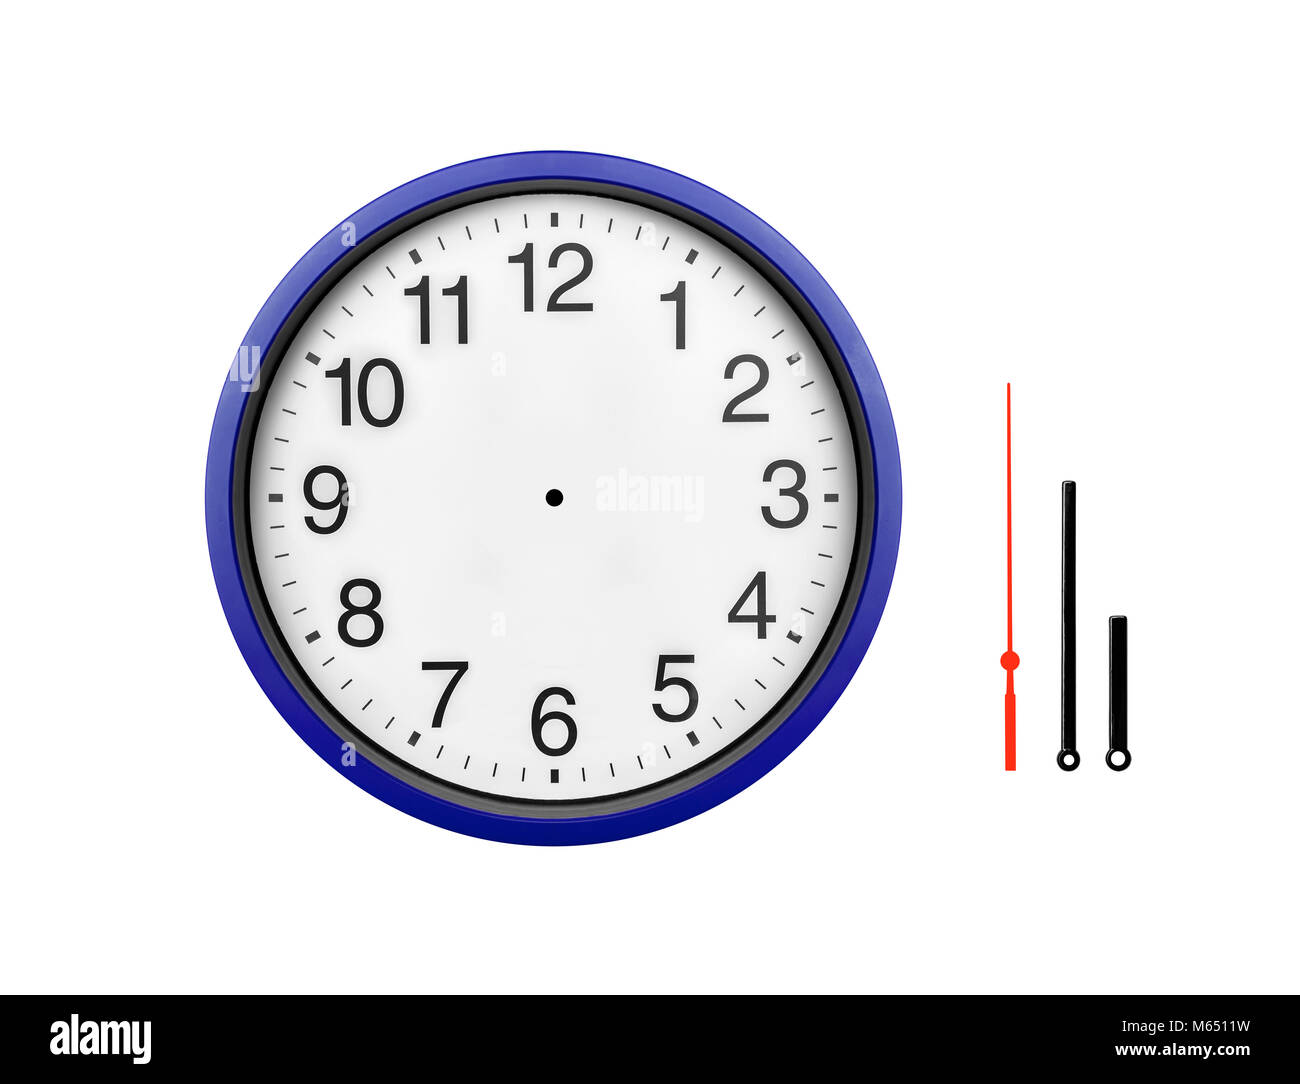 Deep Blue wall clock isolated on a white background. Stock Photo